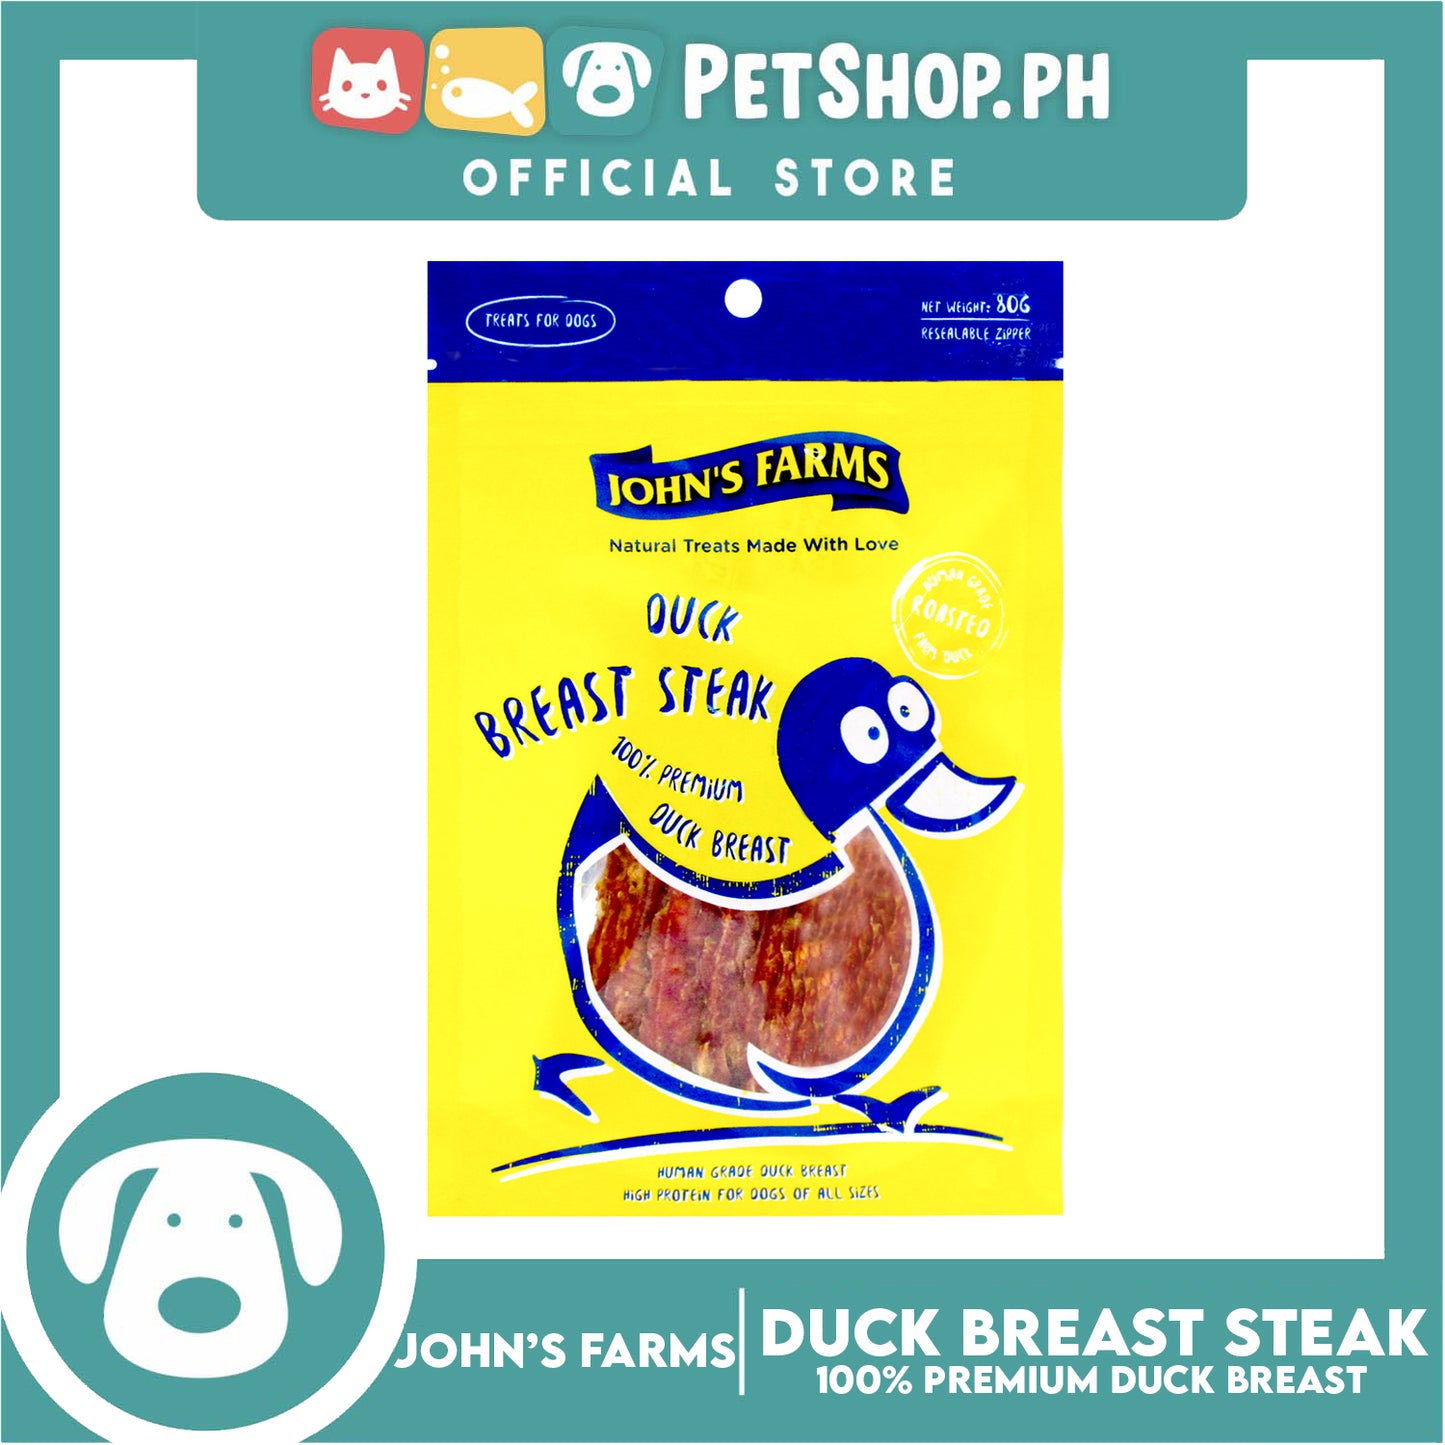 John's Farms Dog Food, High Protein For Dogs Of All Sizes, Resealable Zipper 80g (Duck Breast Steak) Dog Treats